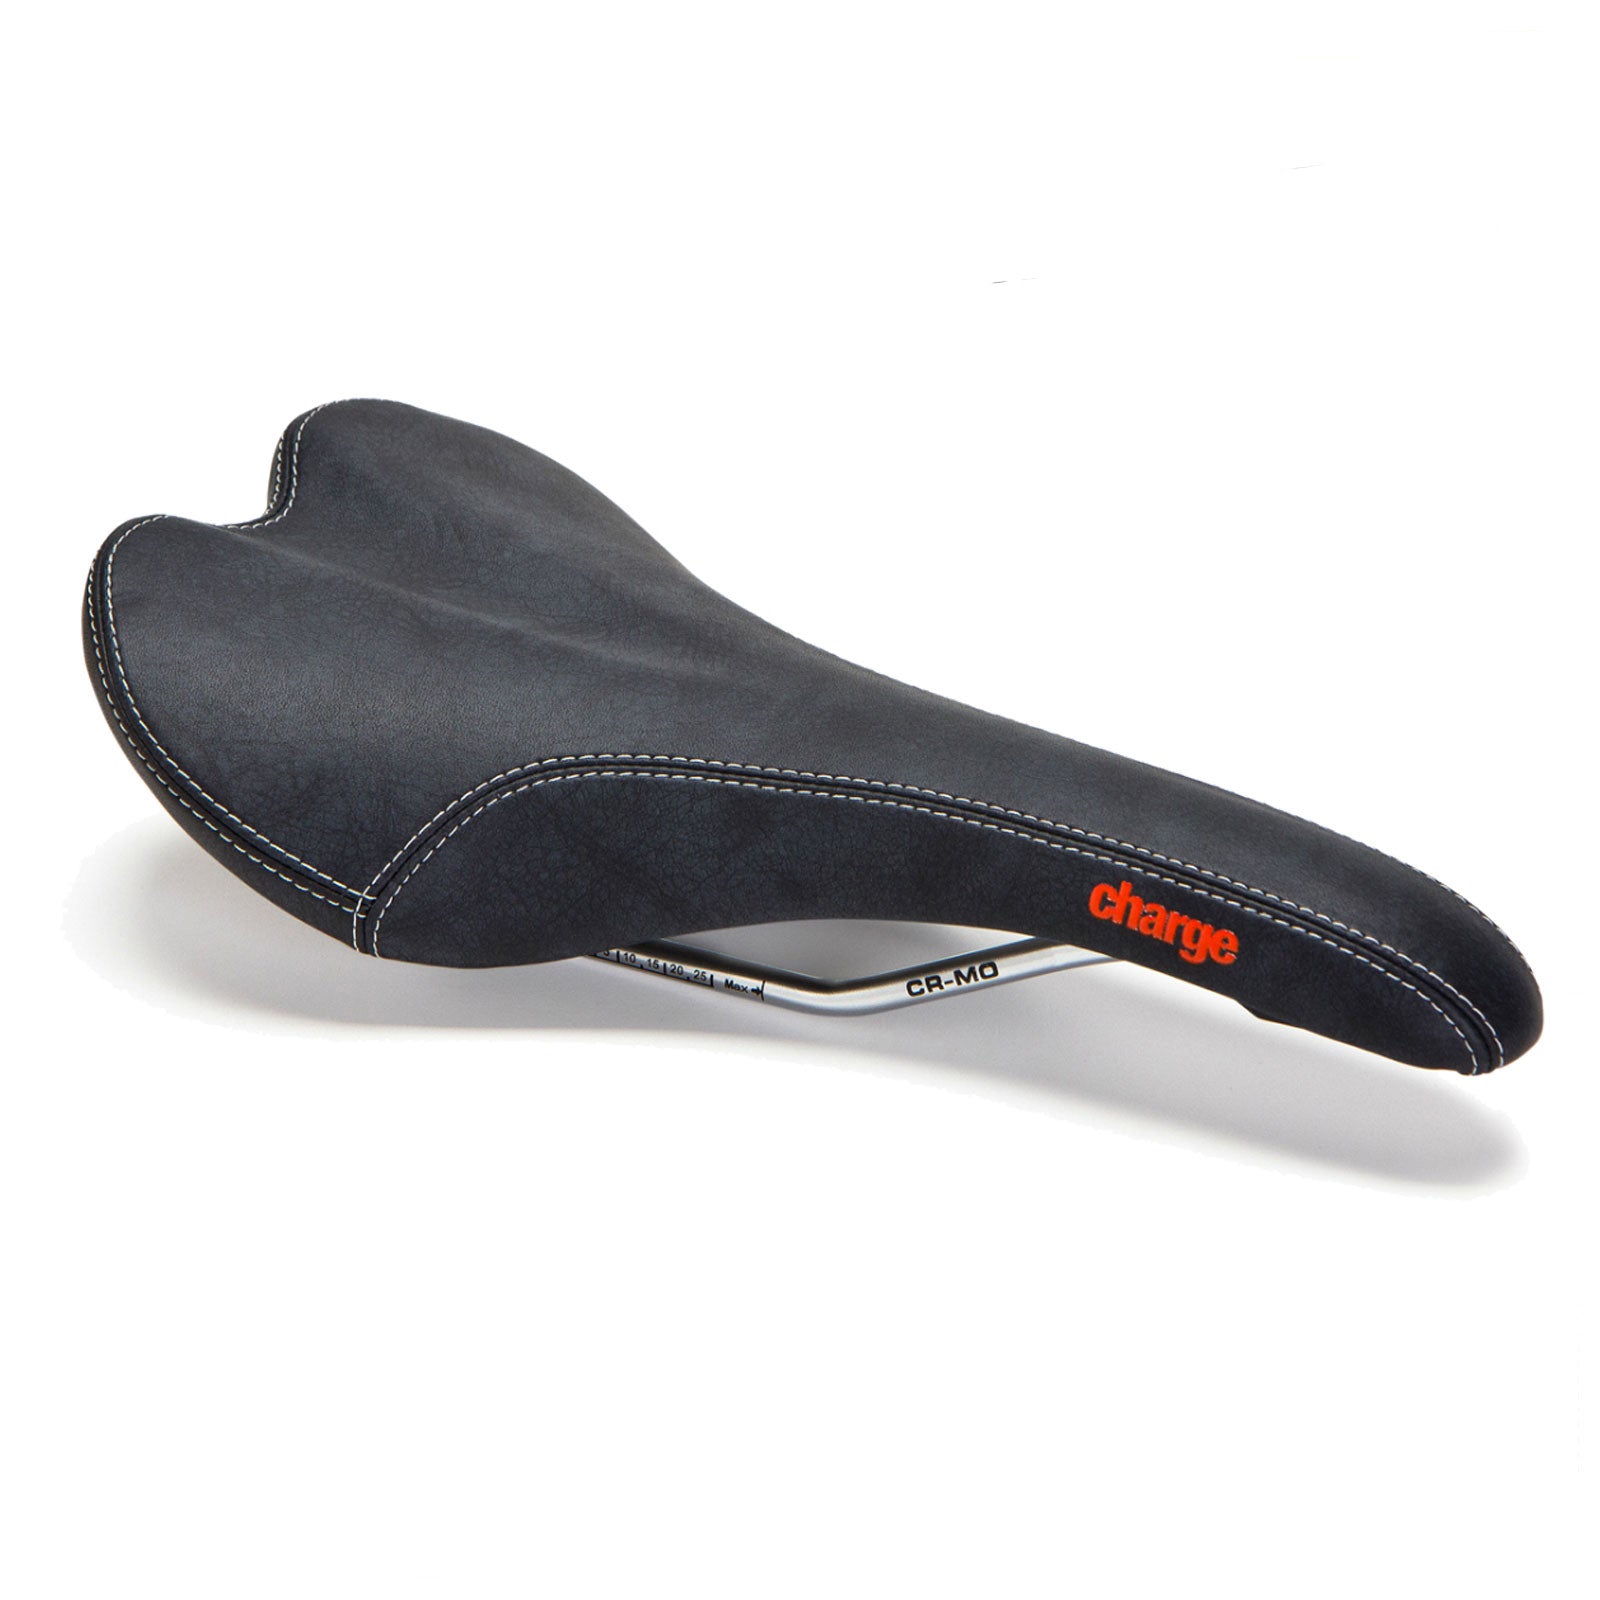 Charge Spoon Classic Bike Saddle - Black With Red Logo